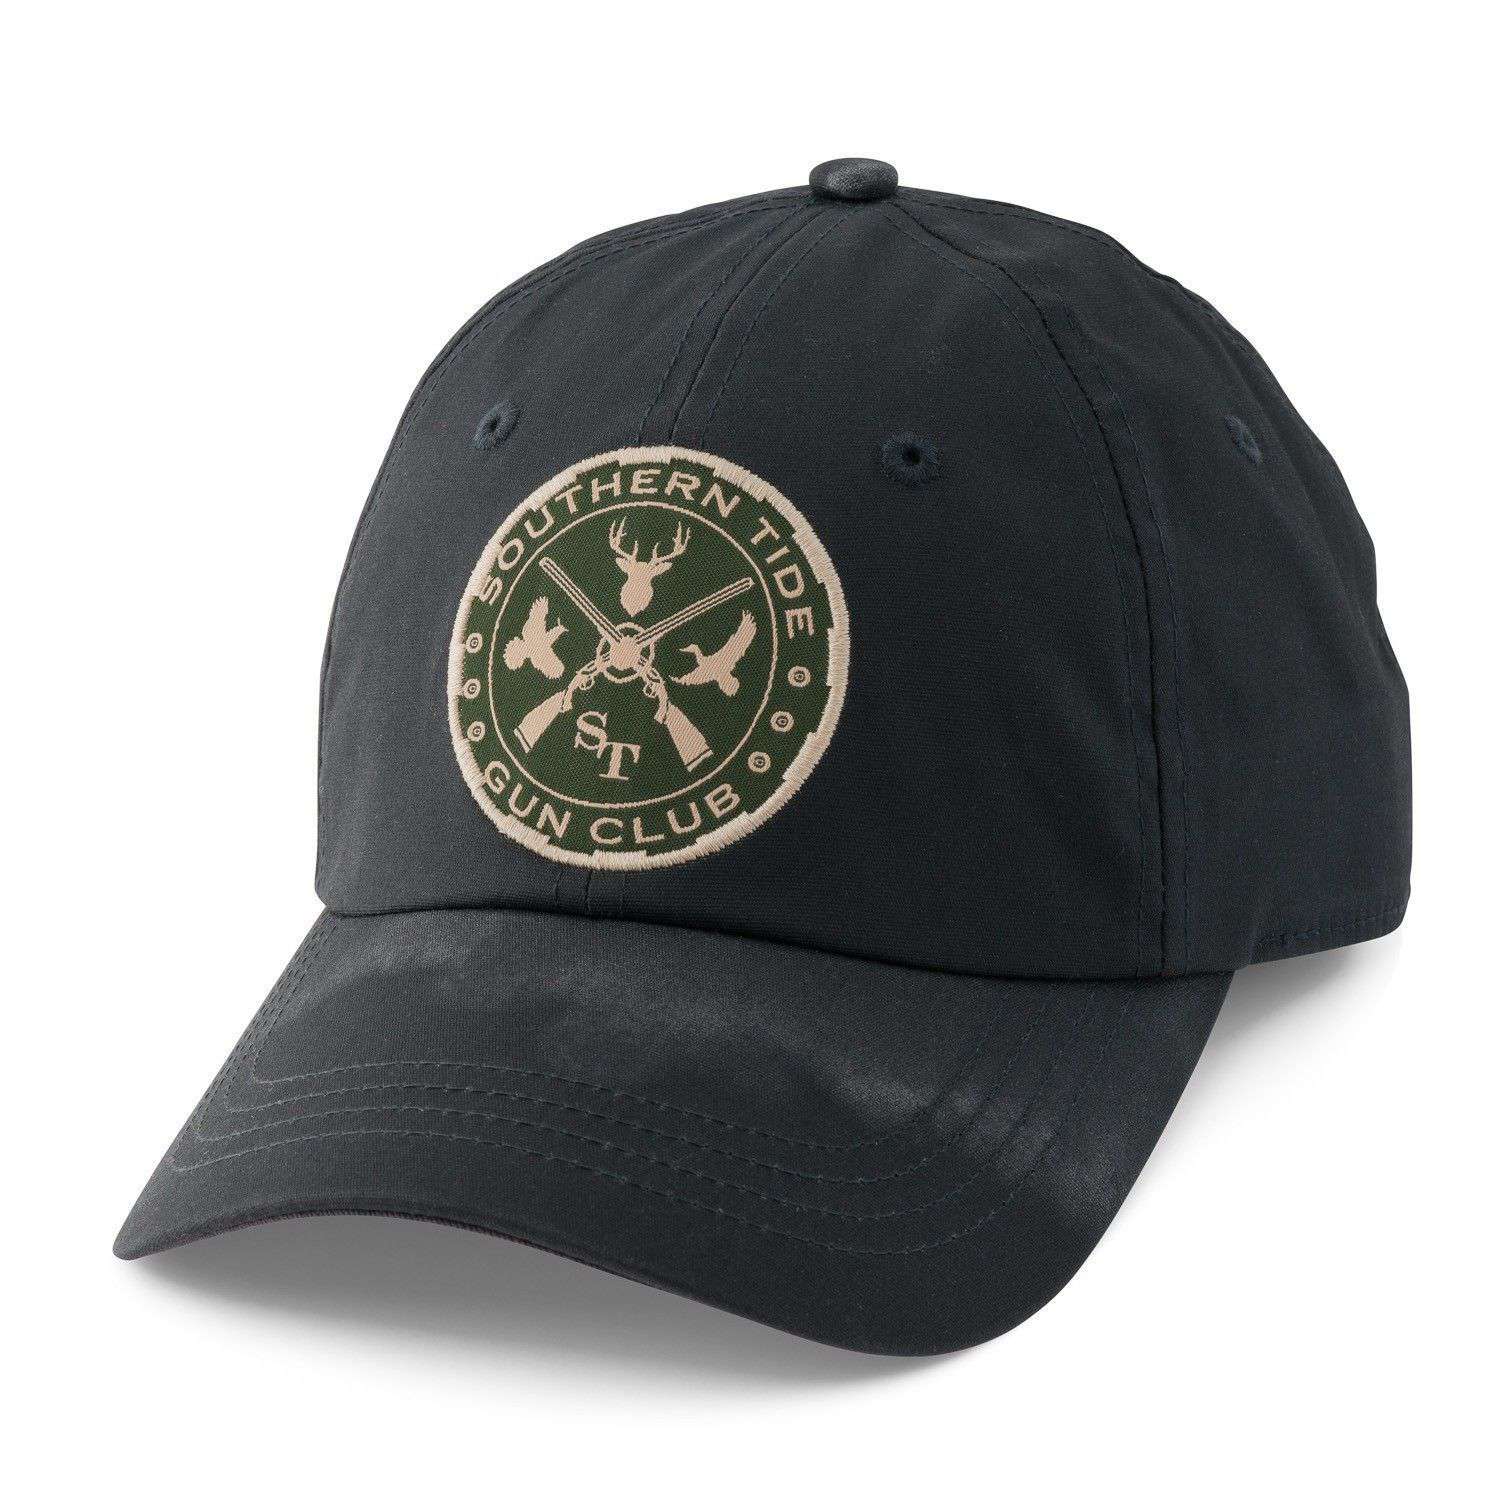 Gun Club Waxed Cotton Hat in Charcoal by Southern Tide - Country Club Prep